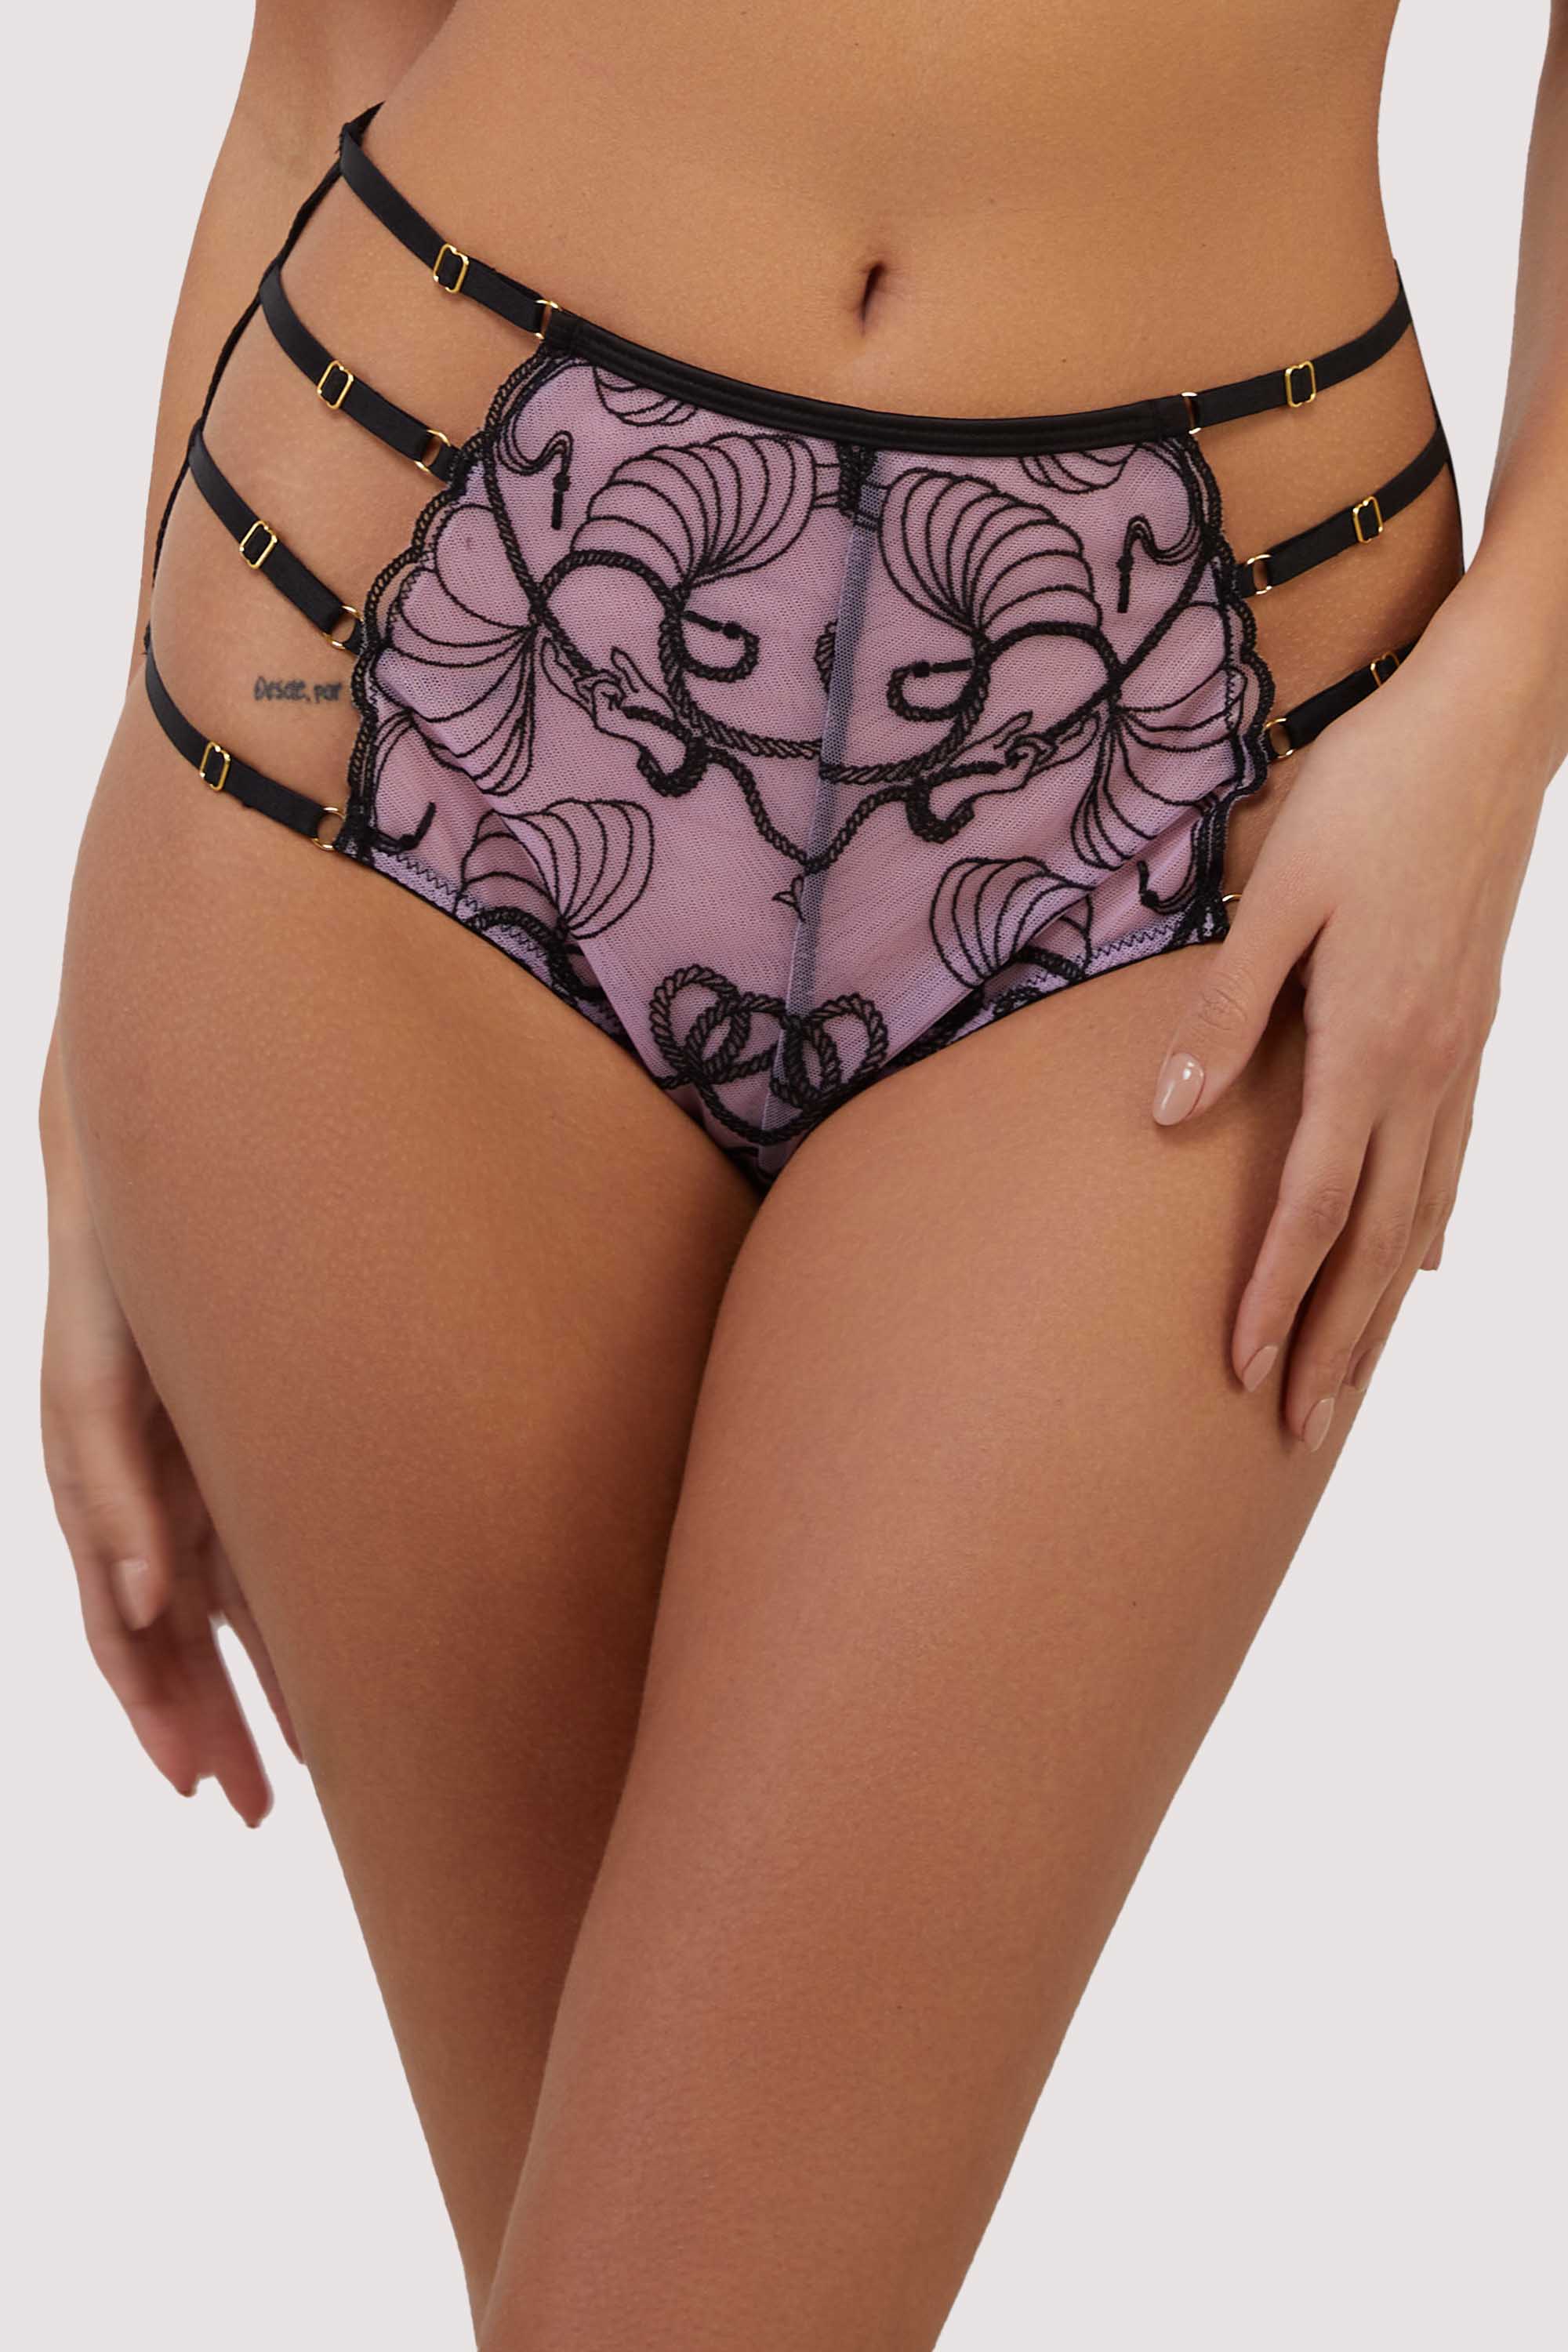 Jessie Pink and Black Whip Embroidery High Waist Brief 12